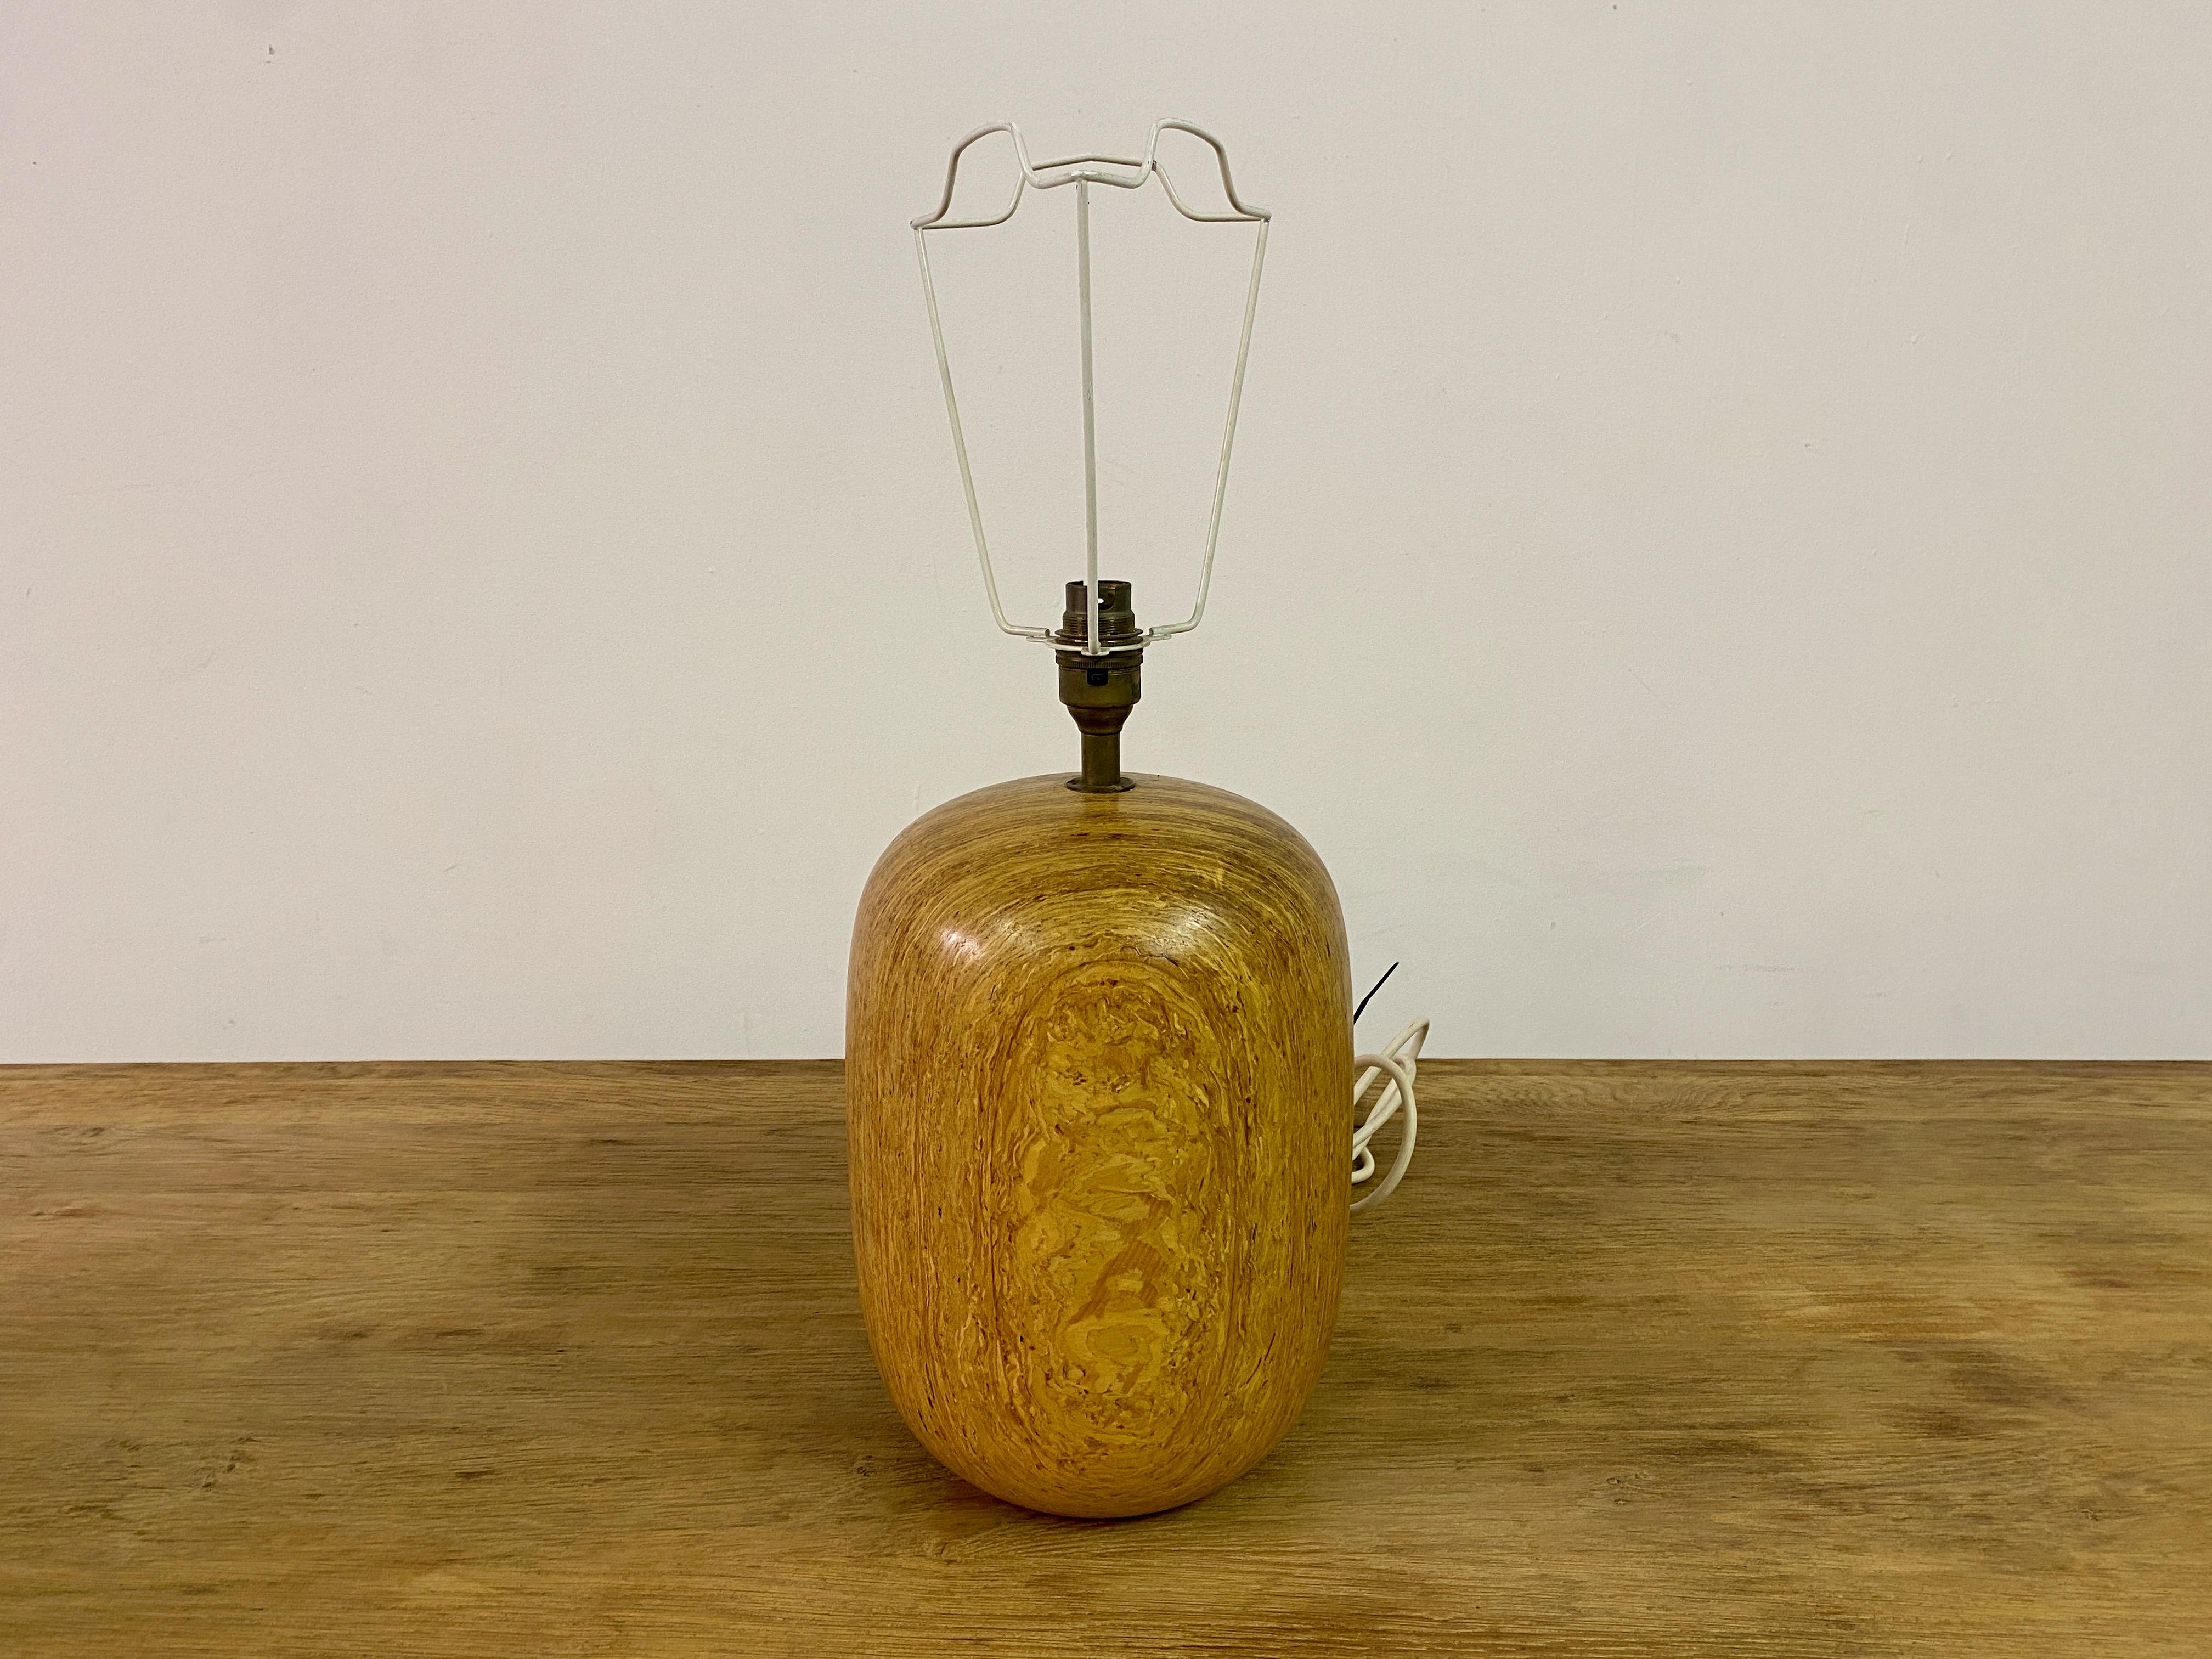 Table lamp

Turned wood

Mid to late 20th Century

Sold without shade
